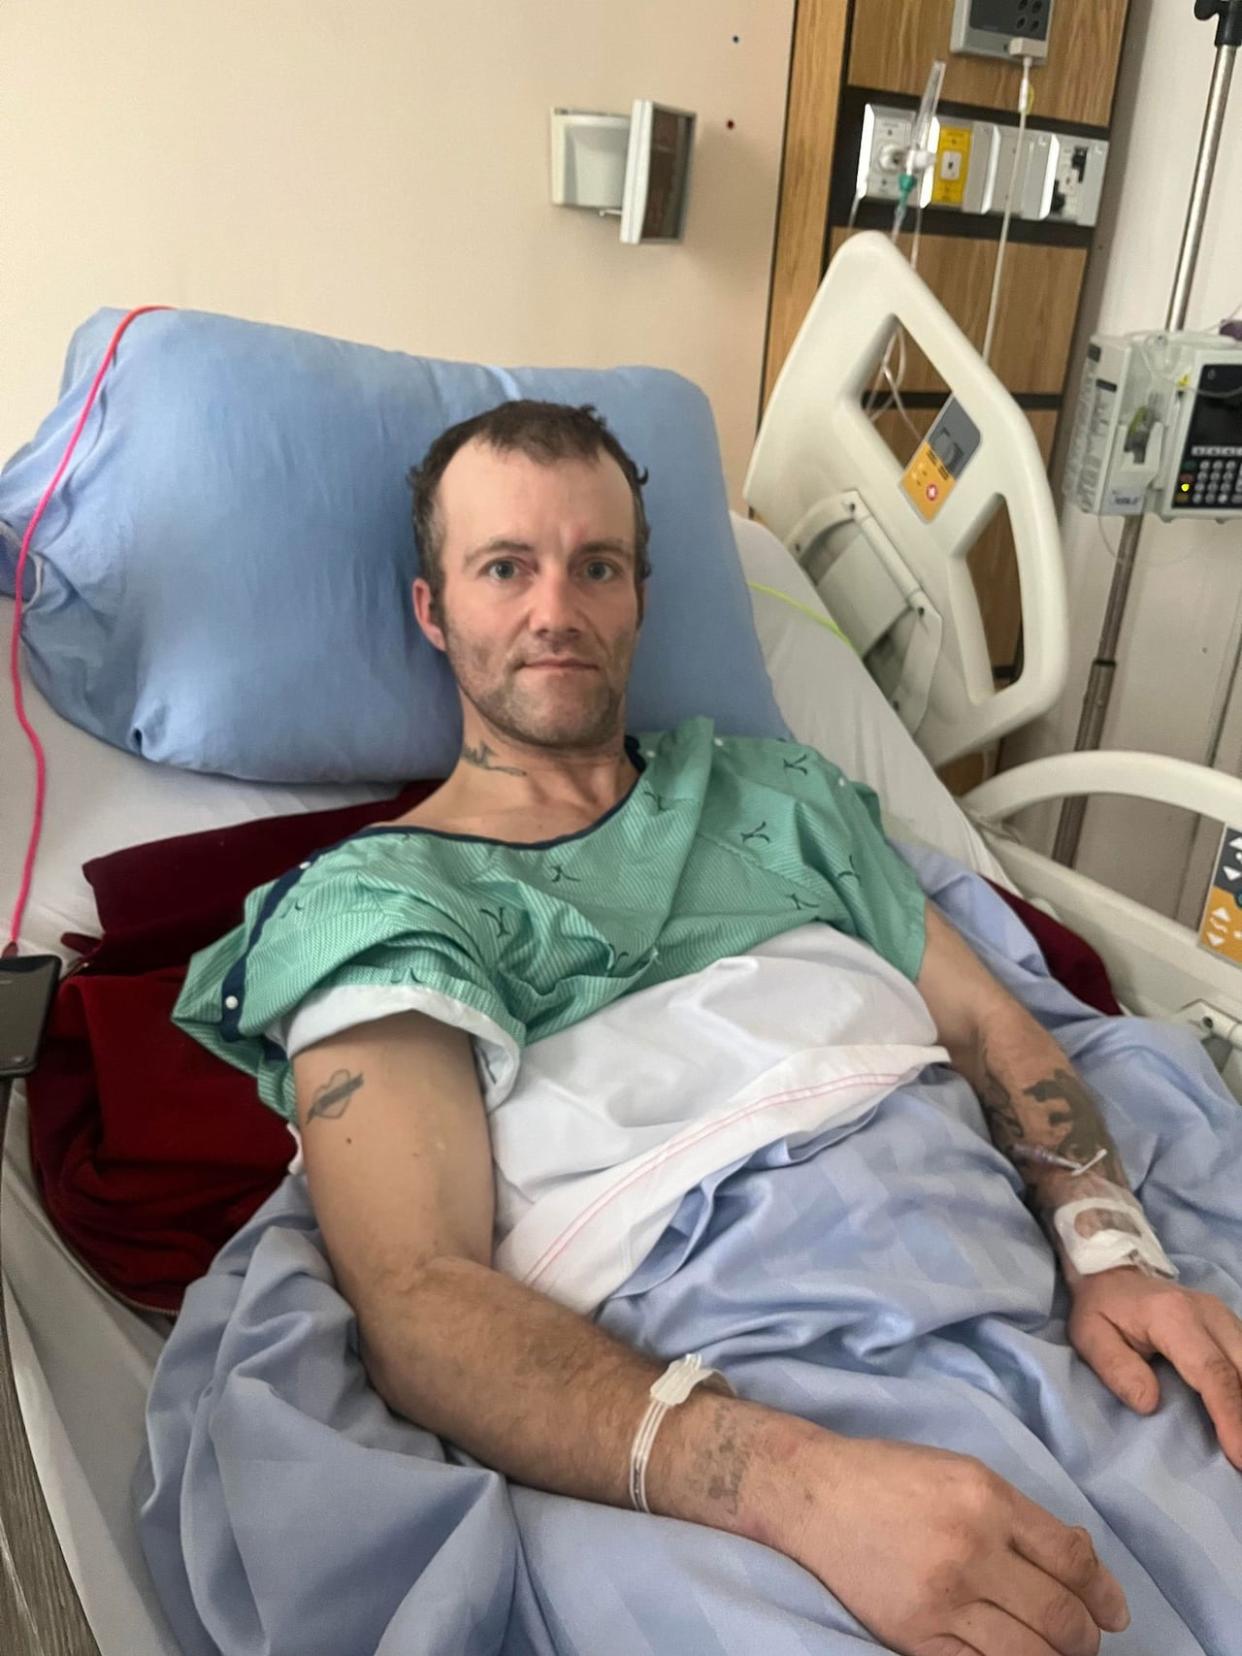 Jamie Langille, 43, of Saint John, is facing a long recovery after having his left leg amputated below the knee and half his right foot amputated due to frostbite. (Catherine Driscoll - image credit)